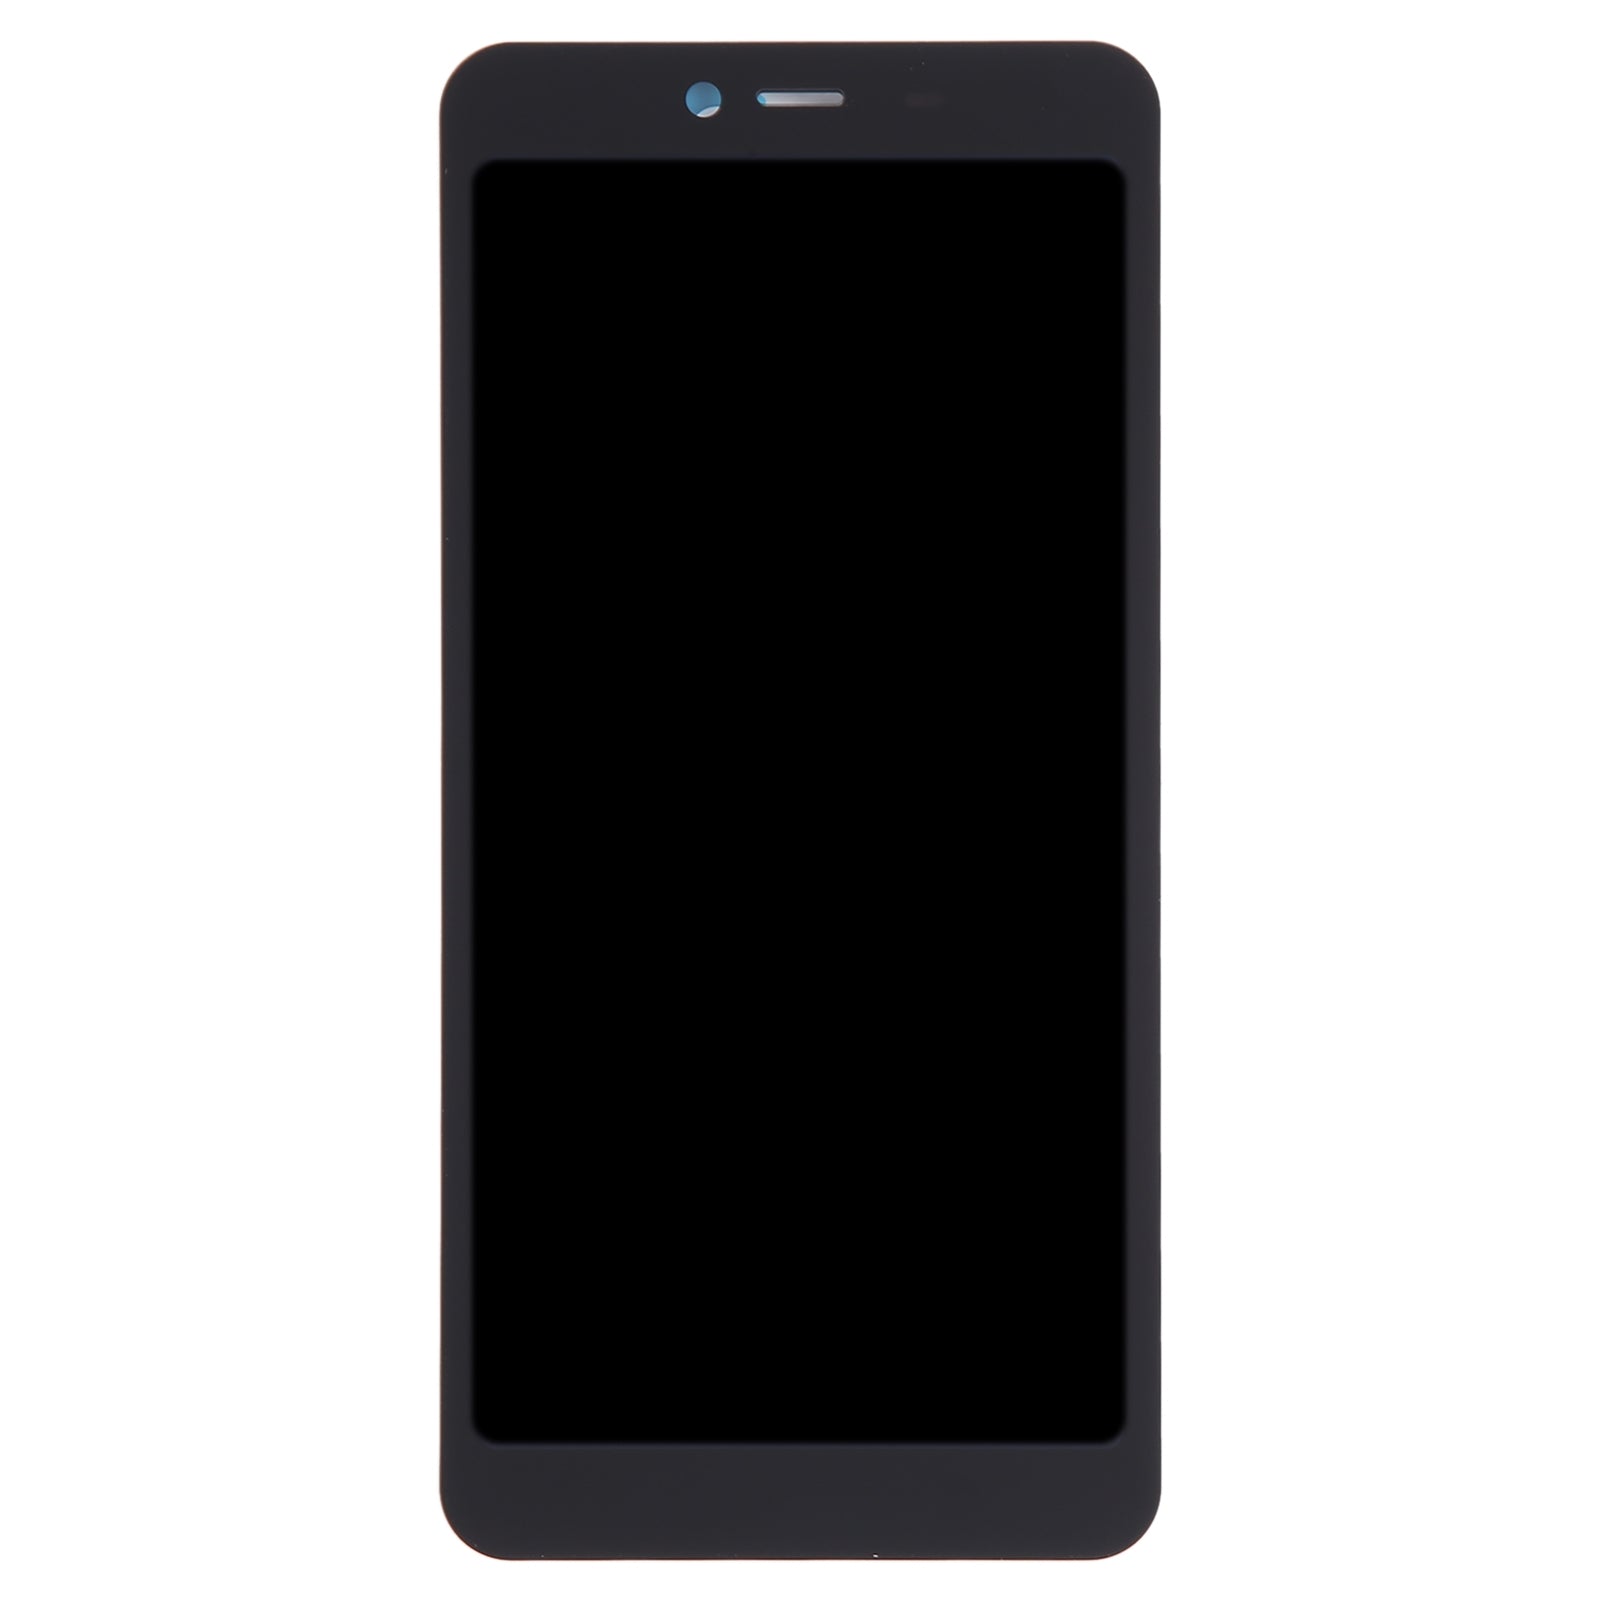 Hotwav T5 Pro LCD Screen and Digitizer Complete Assembly